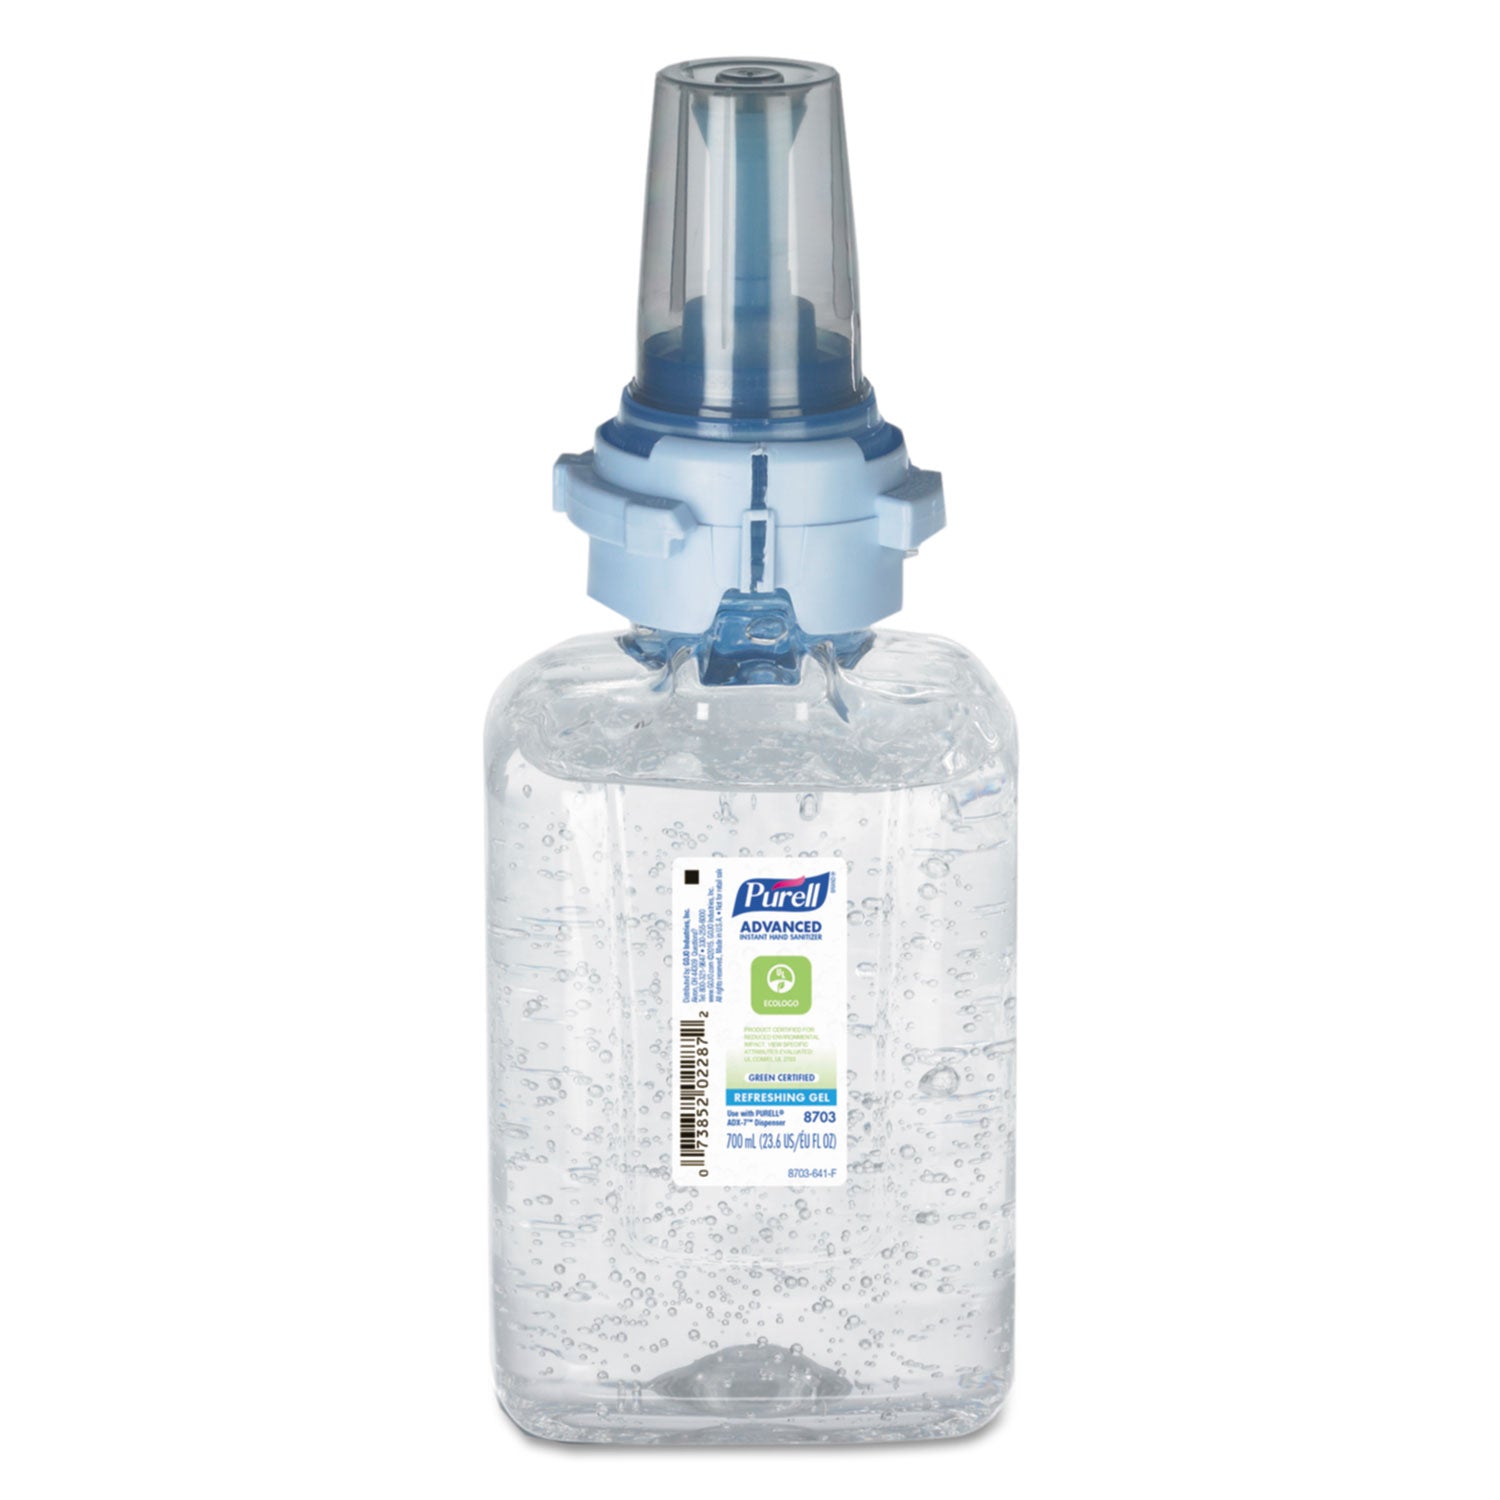 Advanced Hand Sanitizer Green Certified Gel Refill, For ADX-7 Dispensers, 700 mL, Fragrance-Free - 